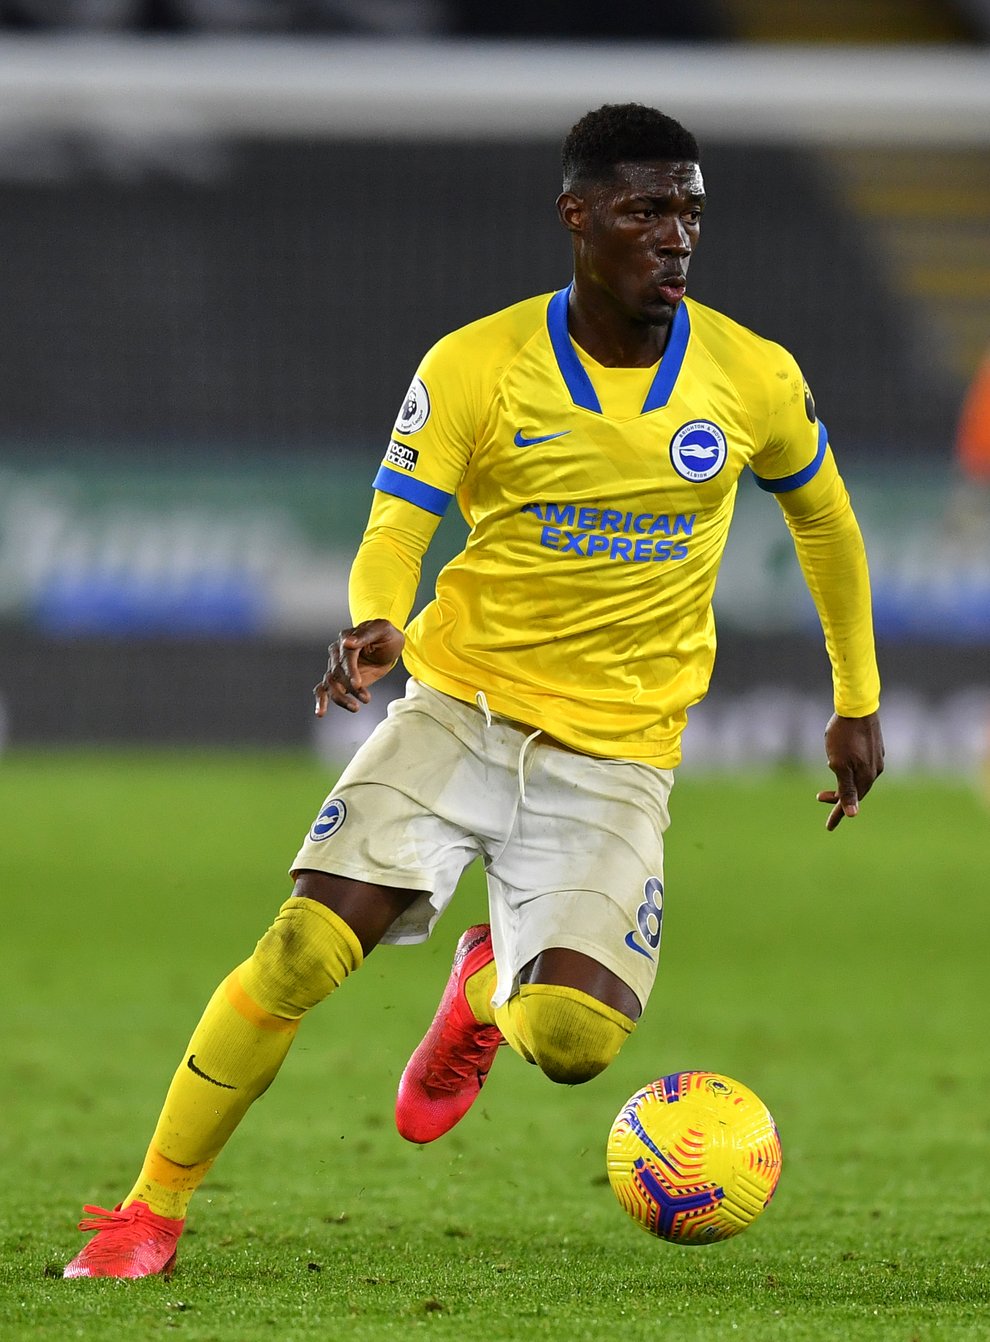 Yves Bissouma joined Brighton from French club Lille in 2018